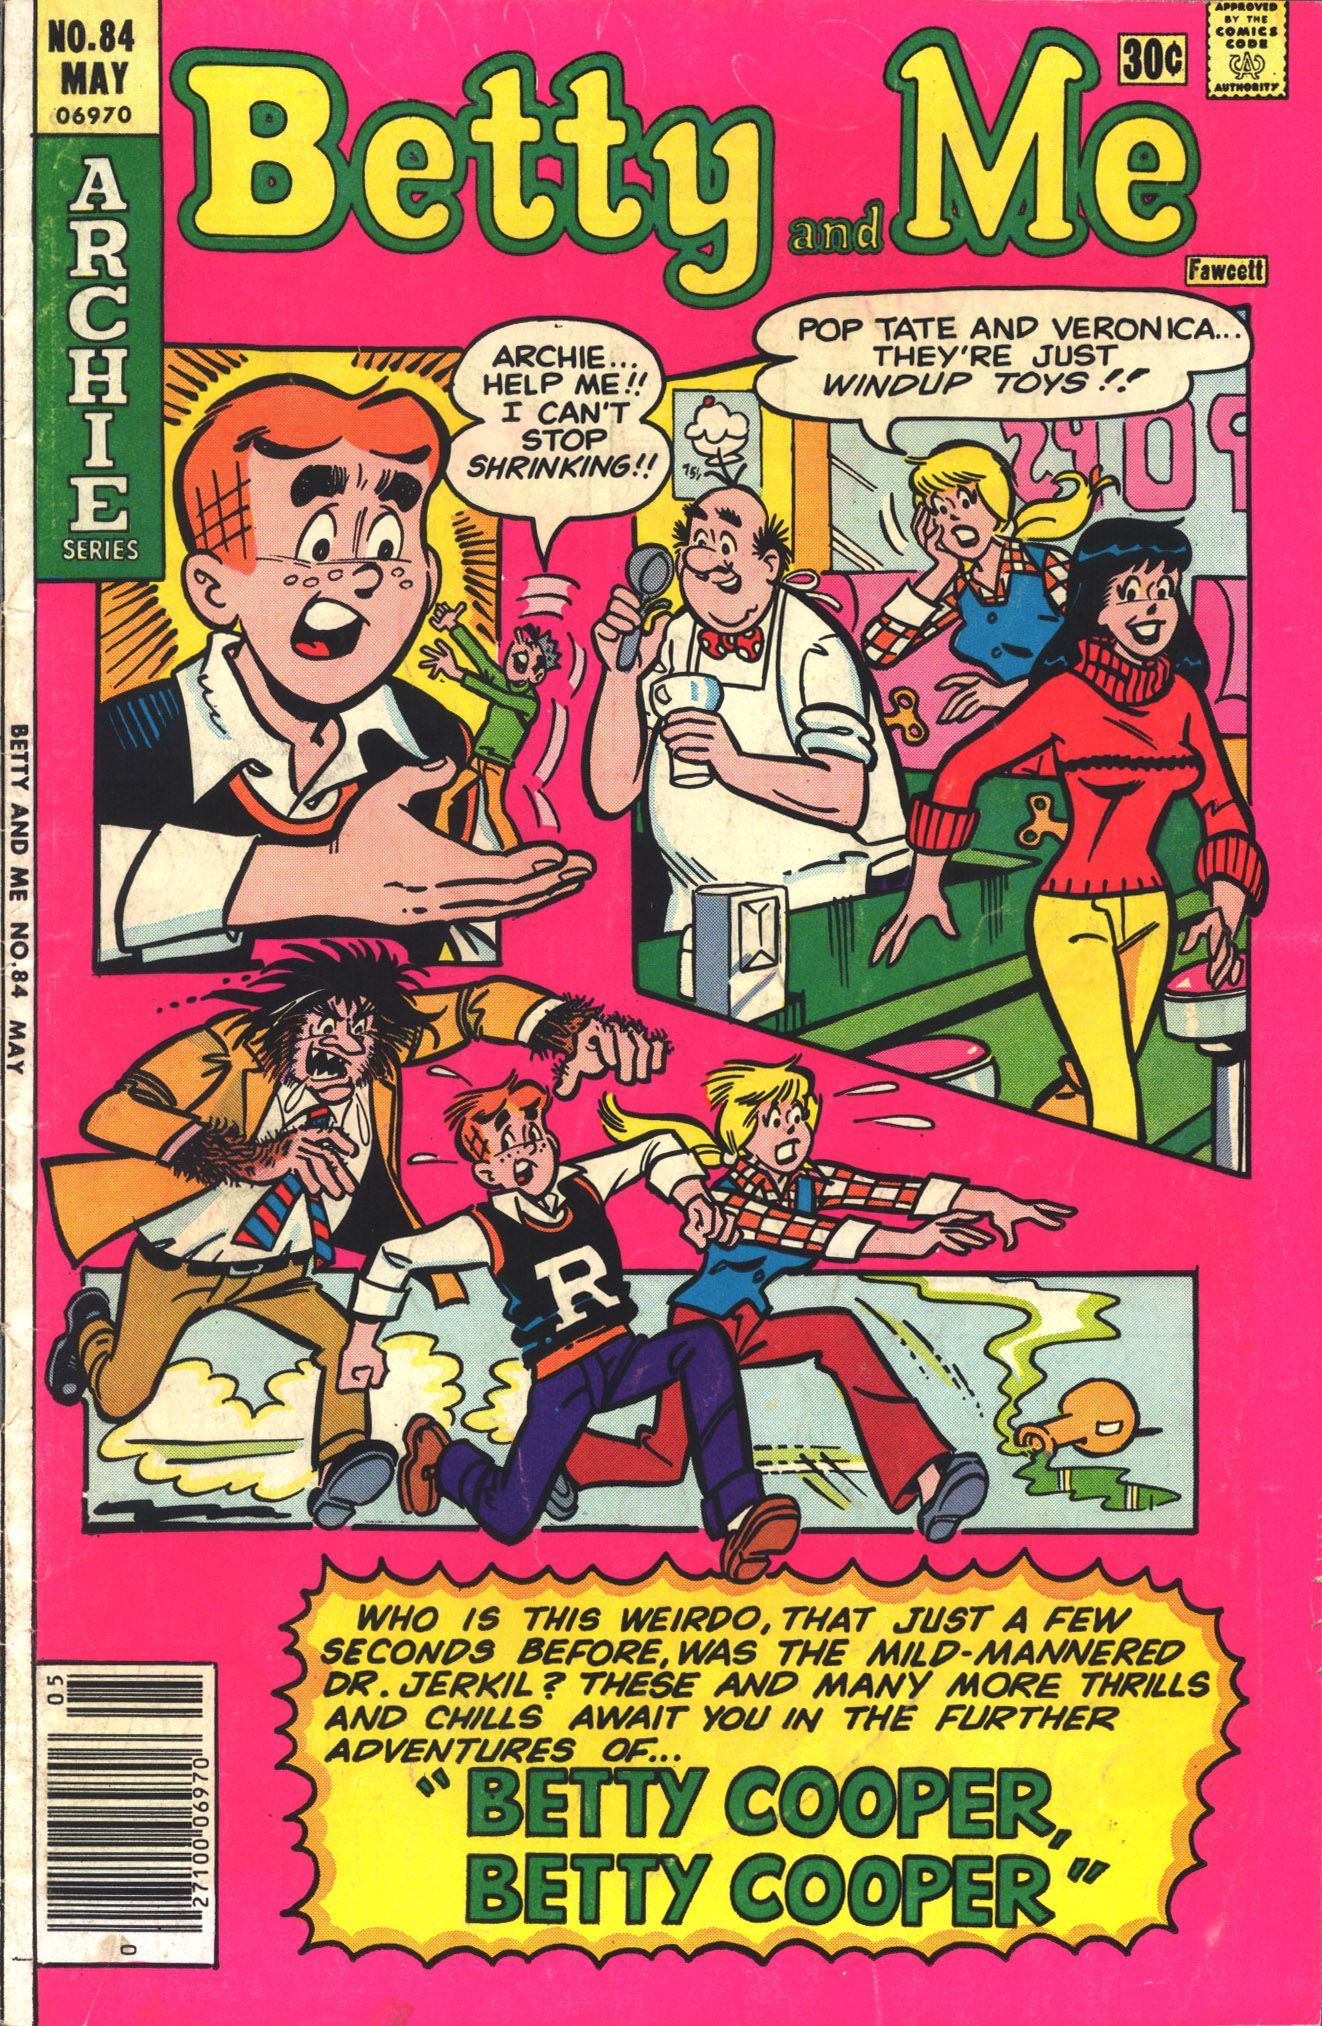 Read online Betty and Me comic -  Issue #84 - 1